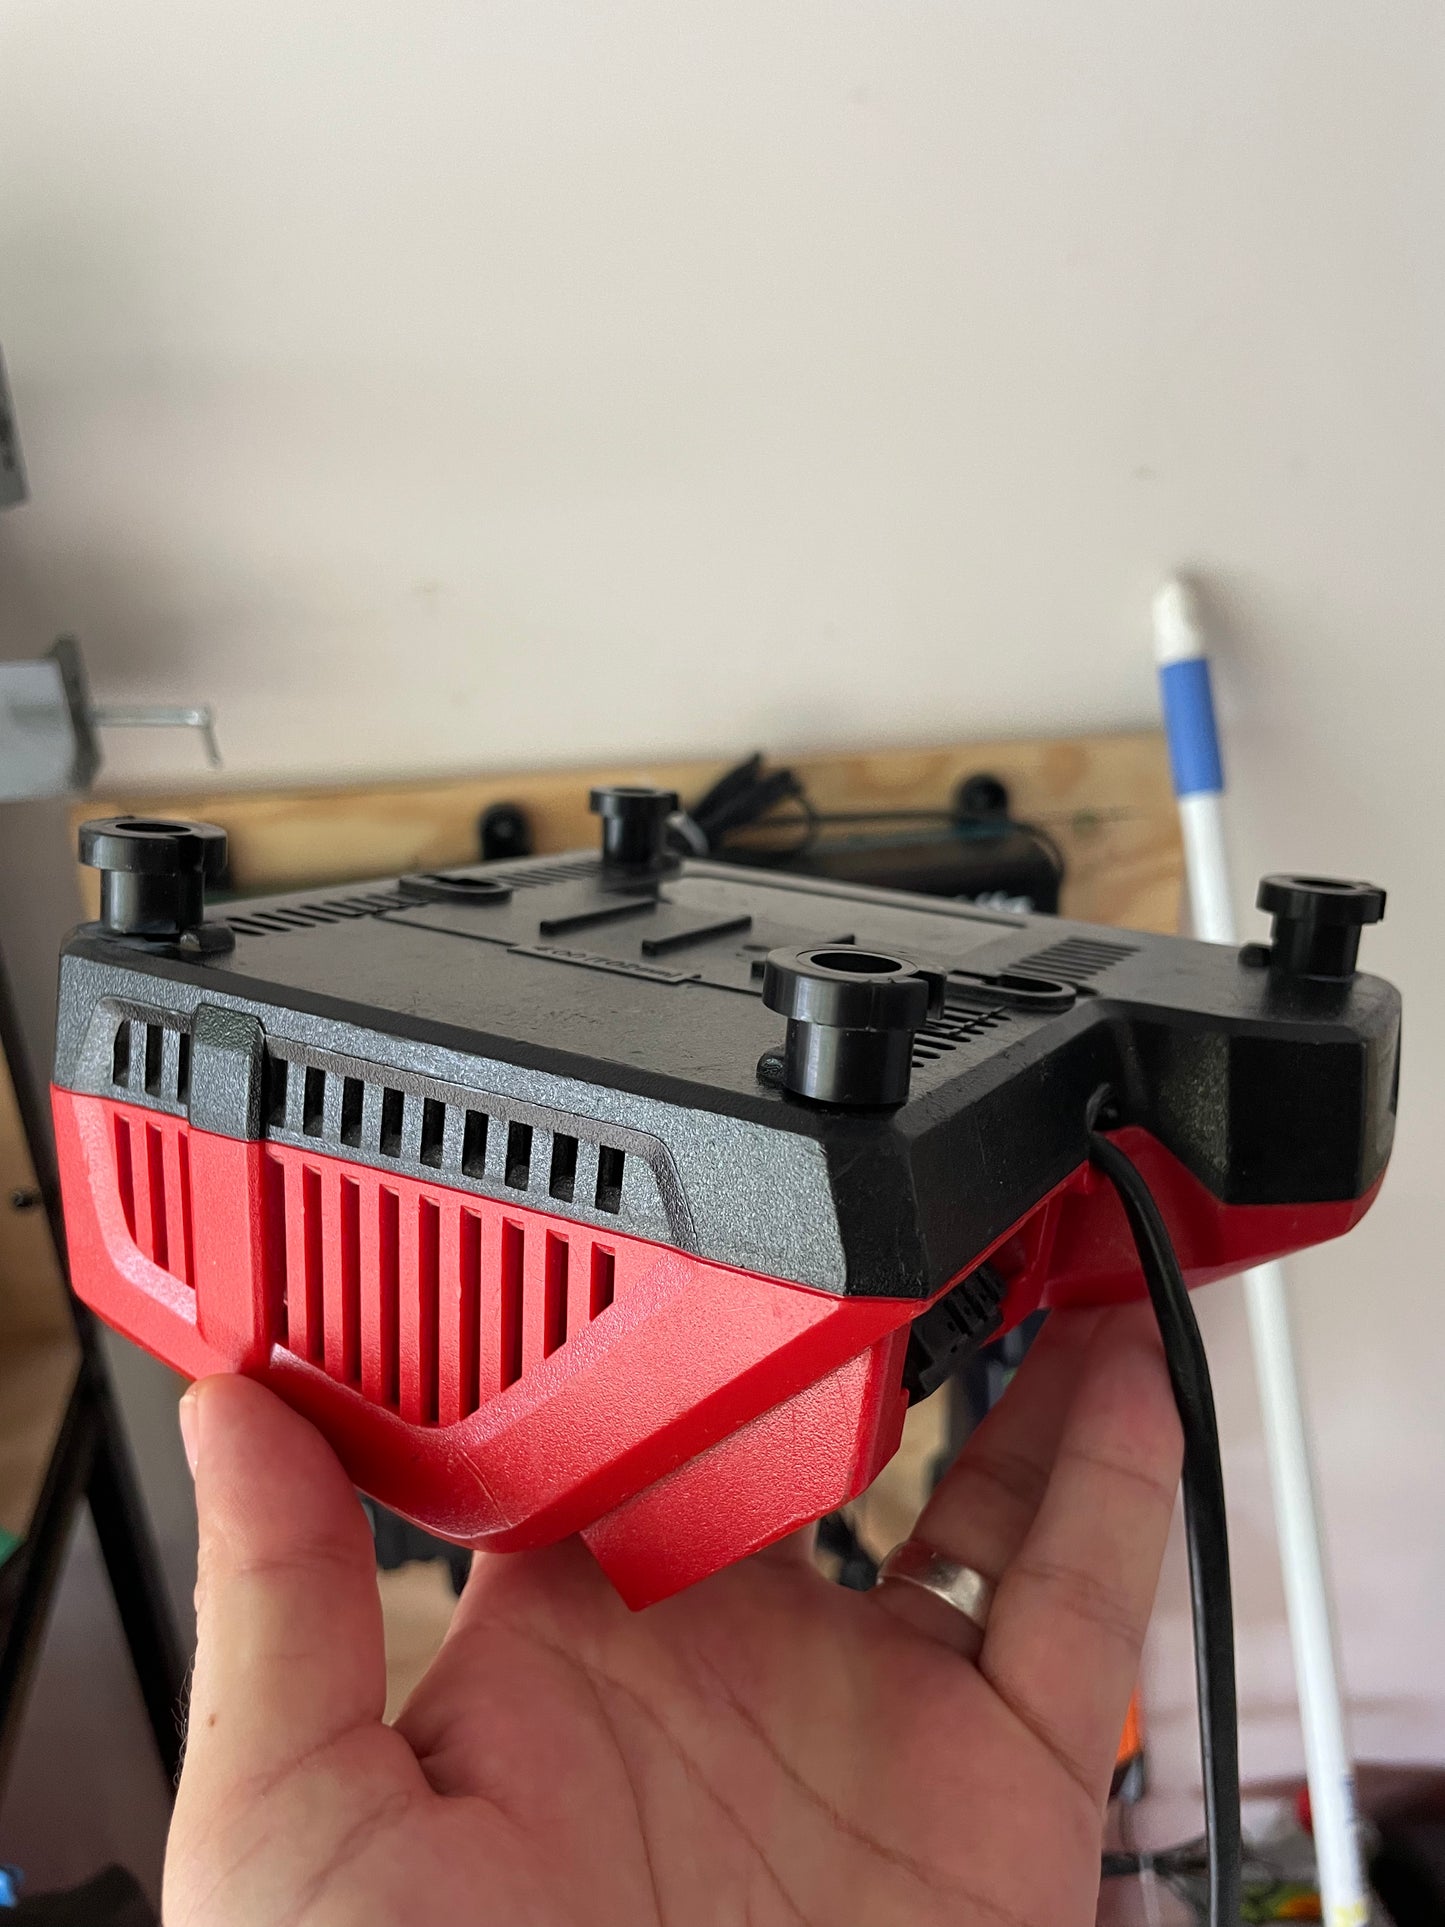 48 Tools Charger Mount